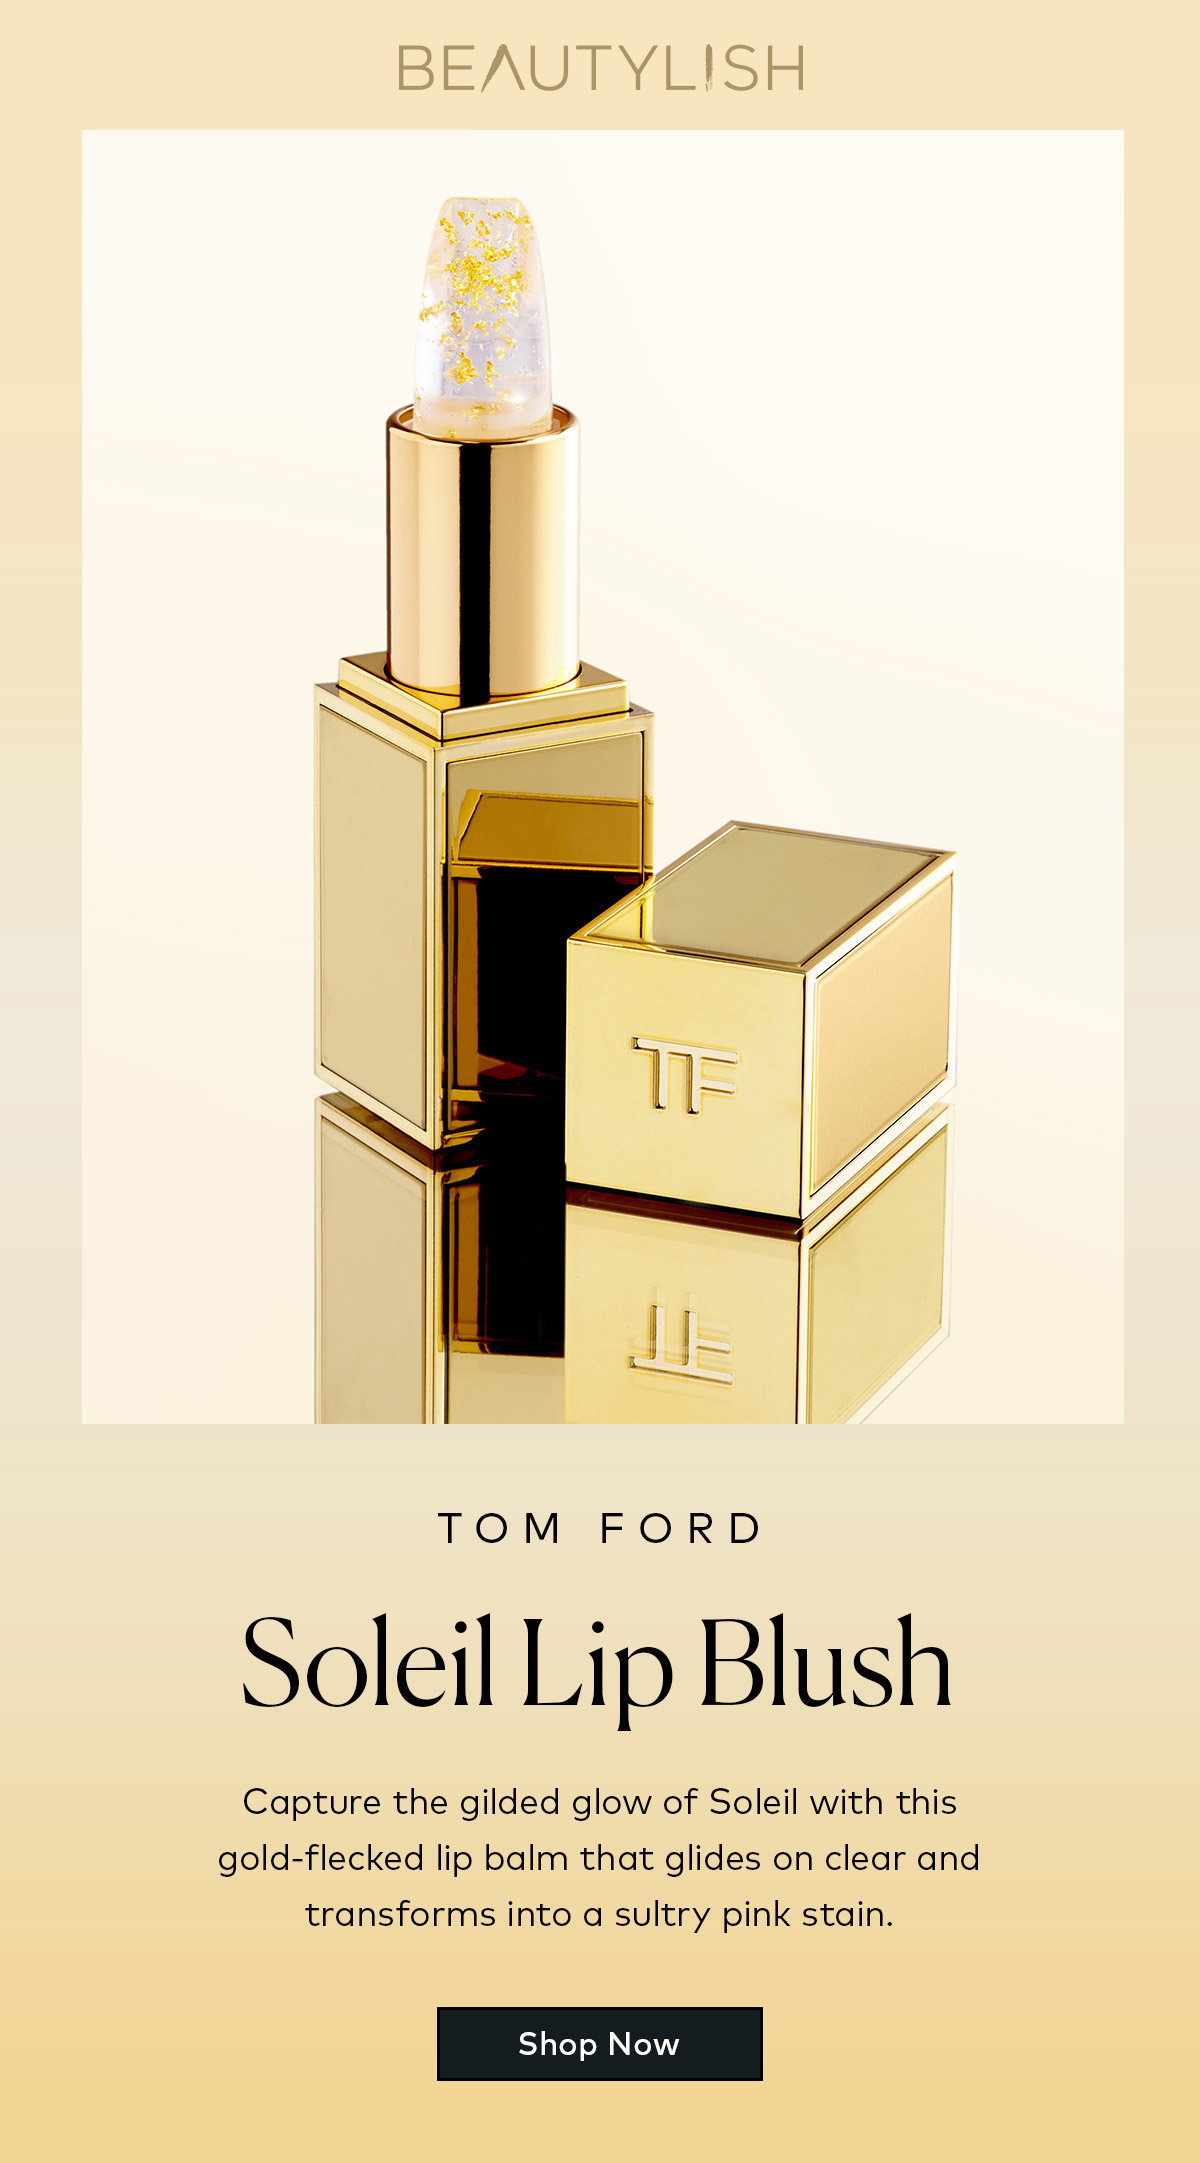 Beautylish: Capture the glow of Soleil with new TOM FORD | Milled